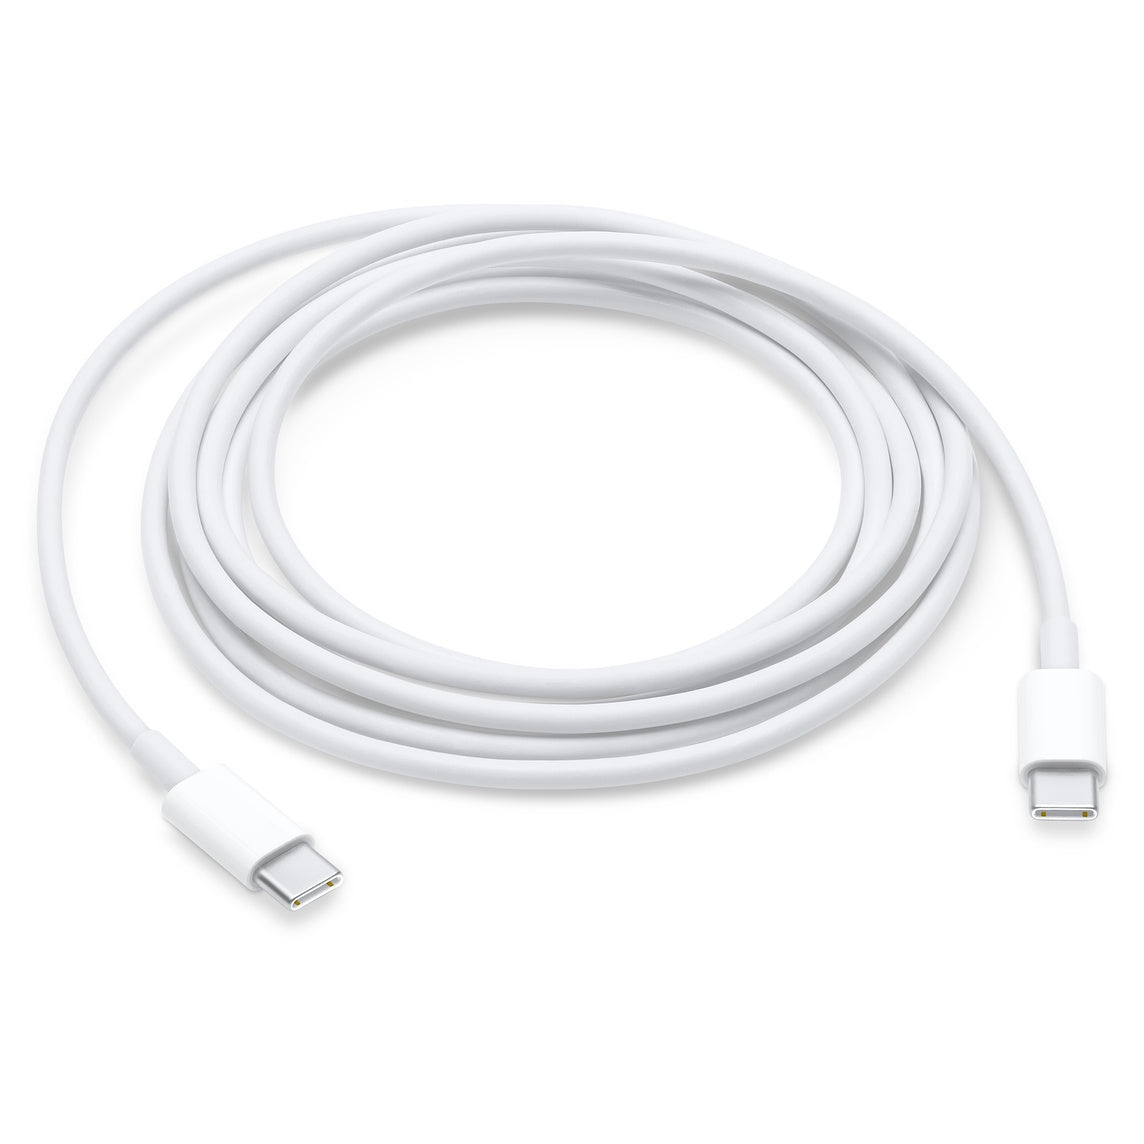 Apple Original Usb Type-c to Usb Type-c Data Charger Cable 2m - White